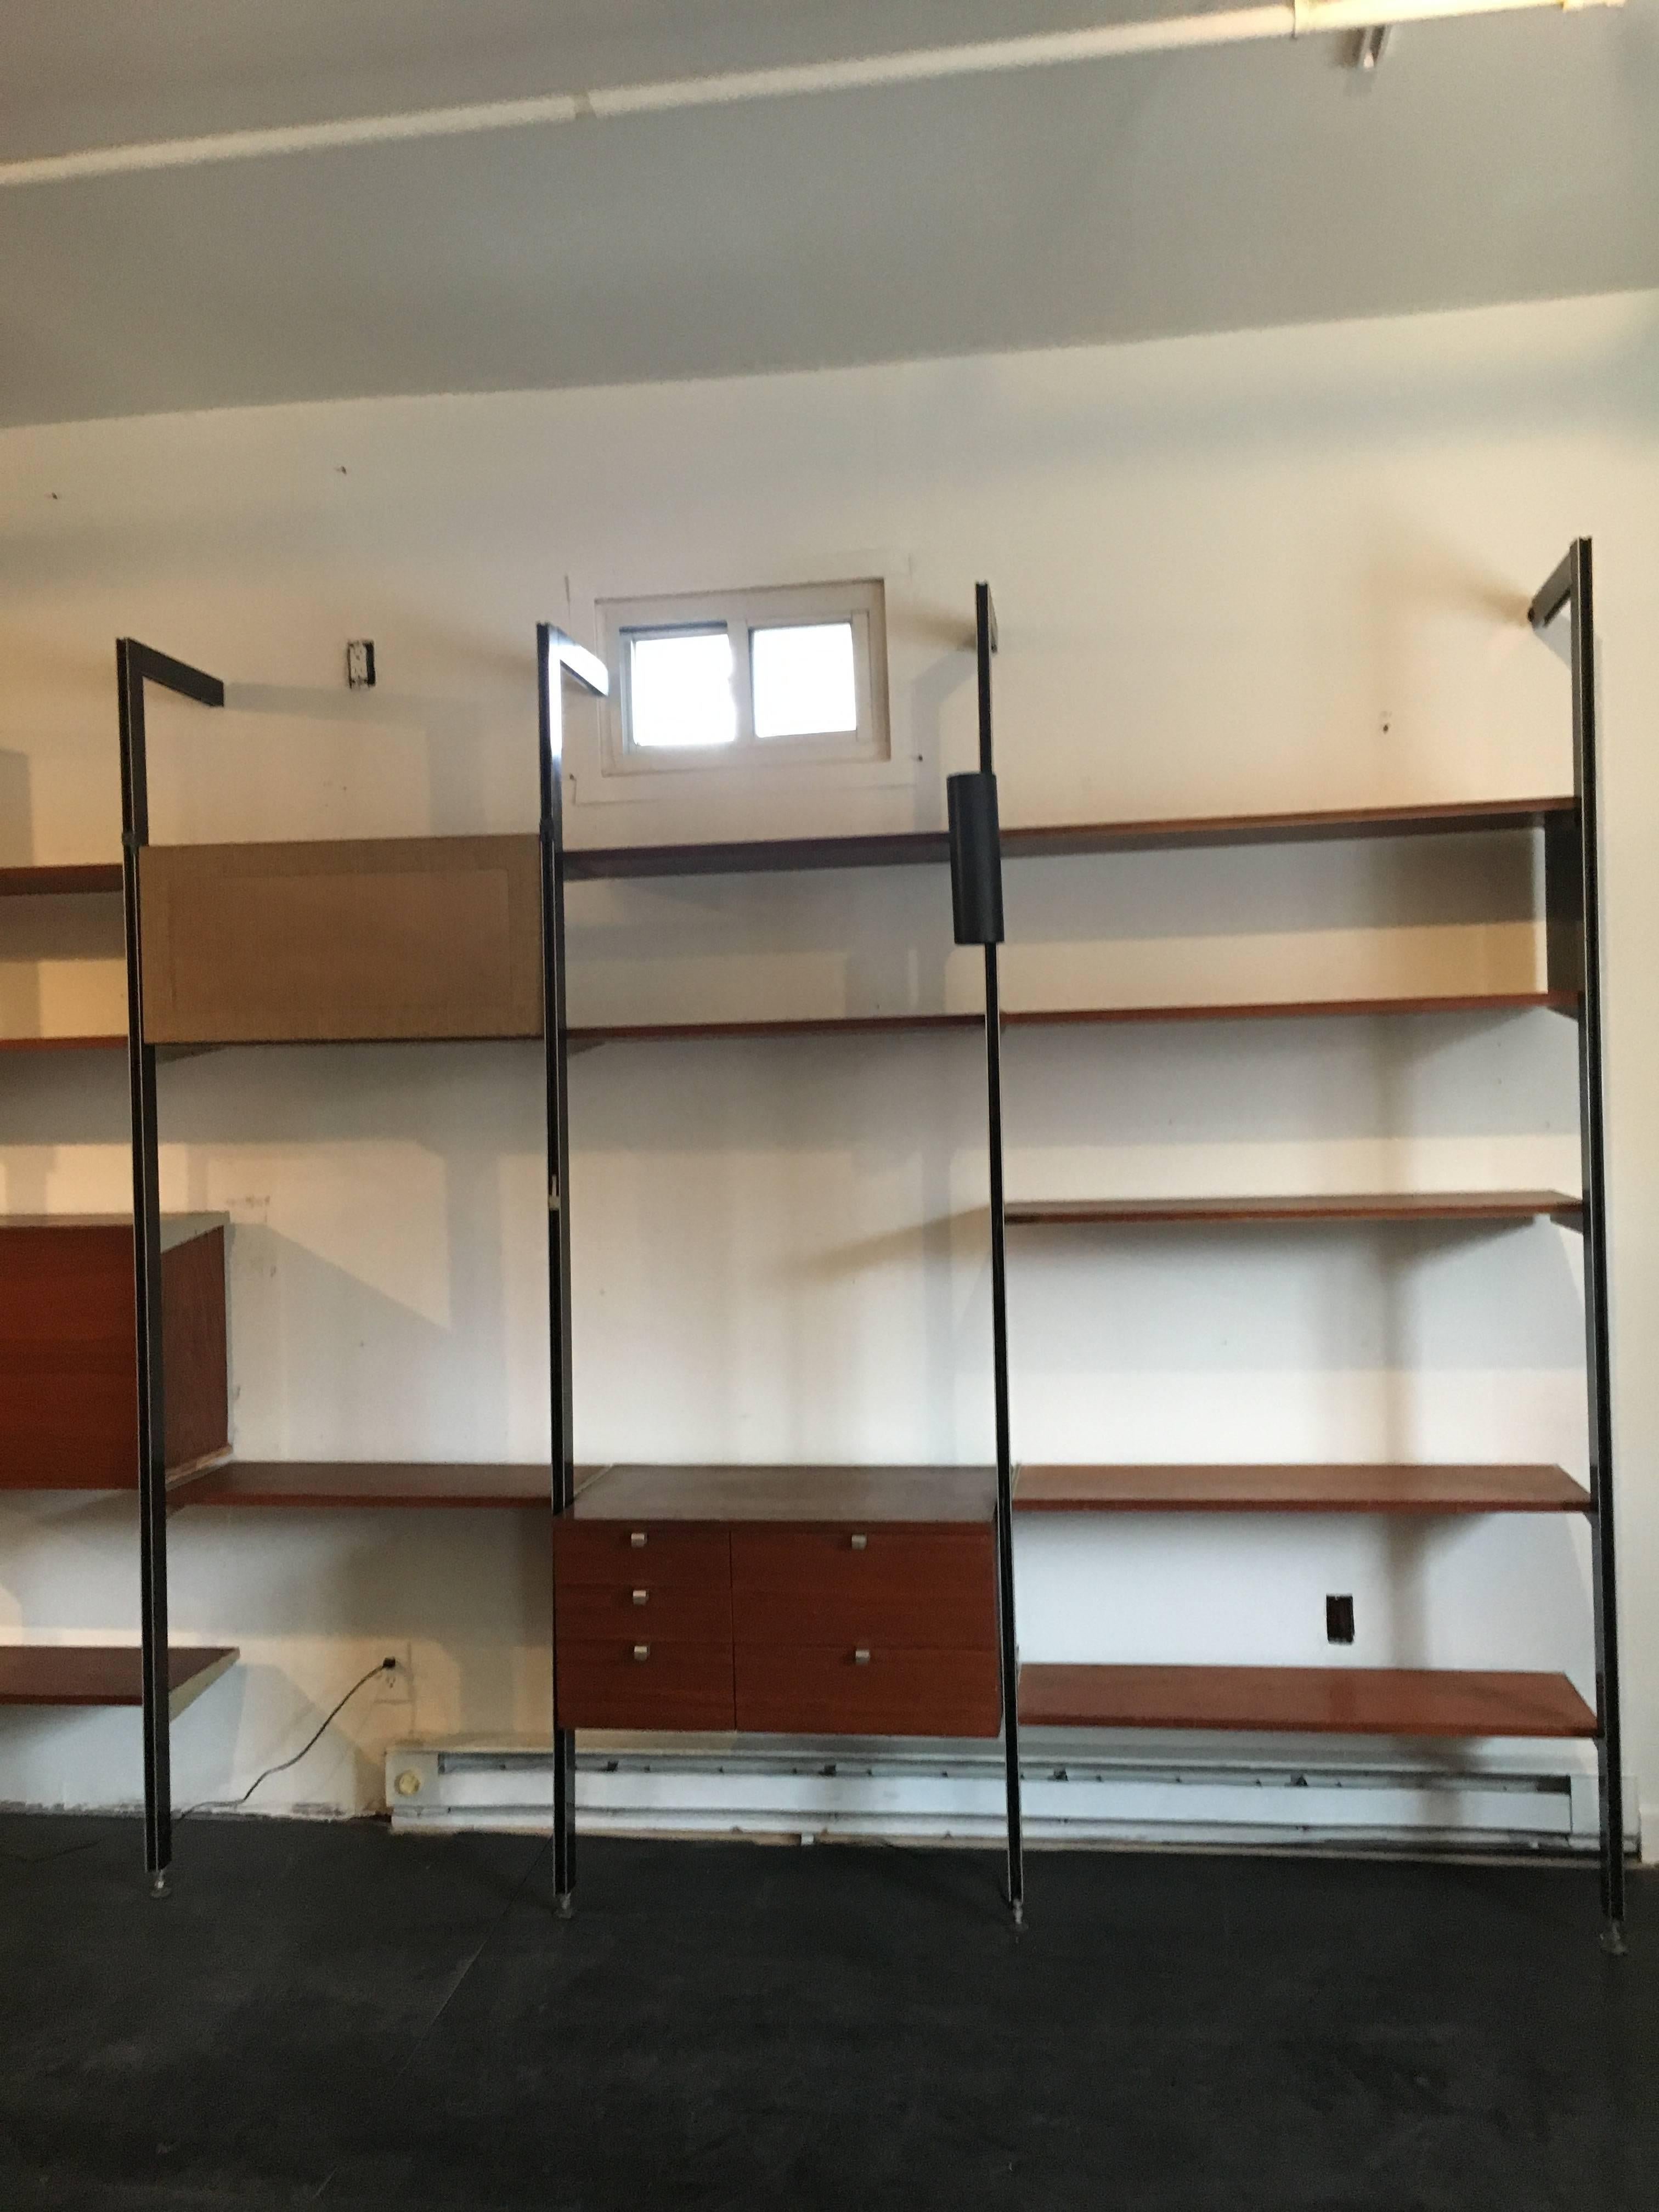 Three bay CSS, designed by George Nelson for Herman Miller, walnut shelves an cabinets.  

Our gallery specializes in George Nelson's CSS storage system of 1959. We currently have several bays available with many different cabinet, lighting, and